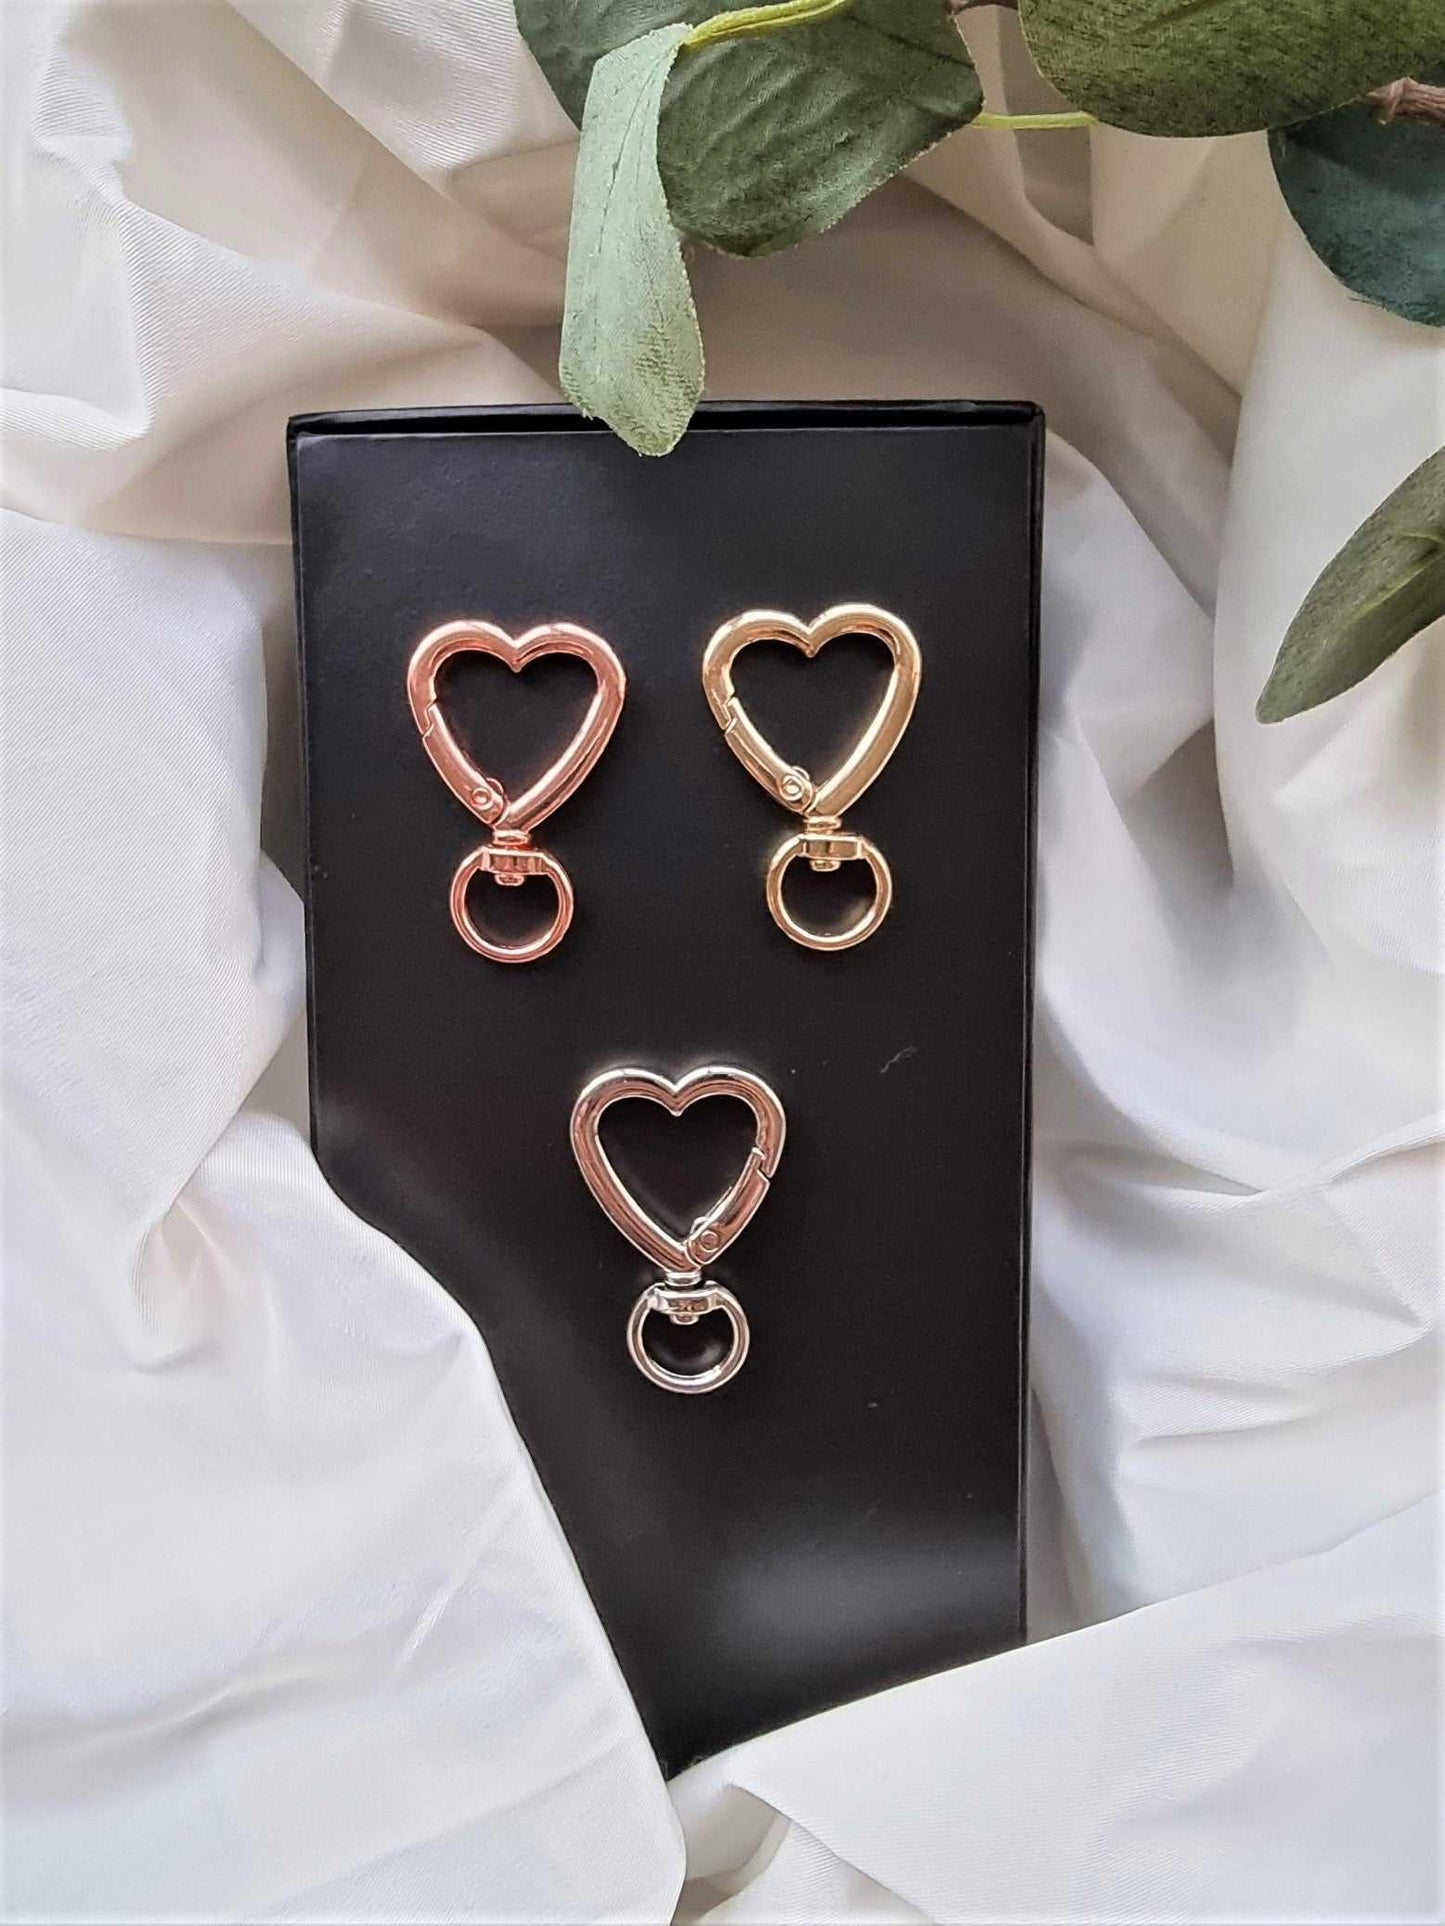 Heart Shaped Key Ring Clasps 3 Piece 27mmx40mm | Heart Key Ring Stardust Melbourne